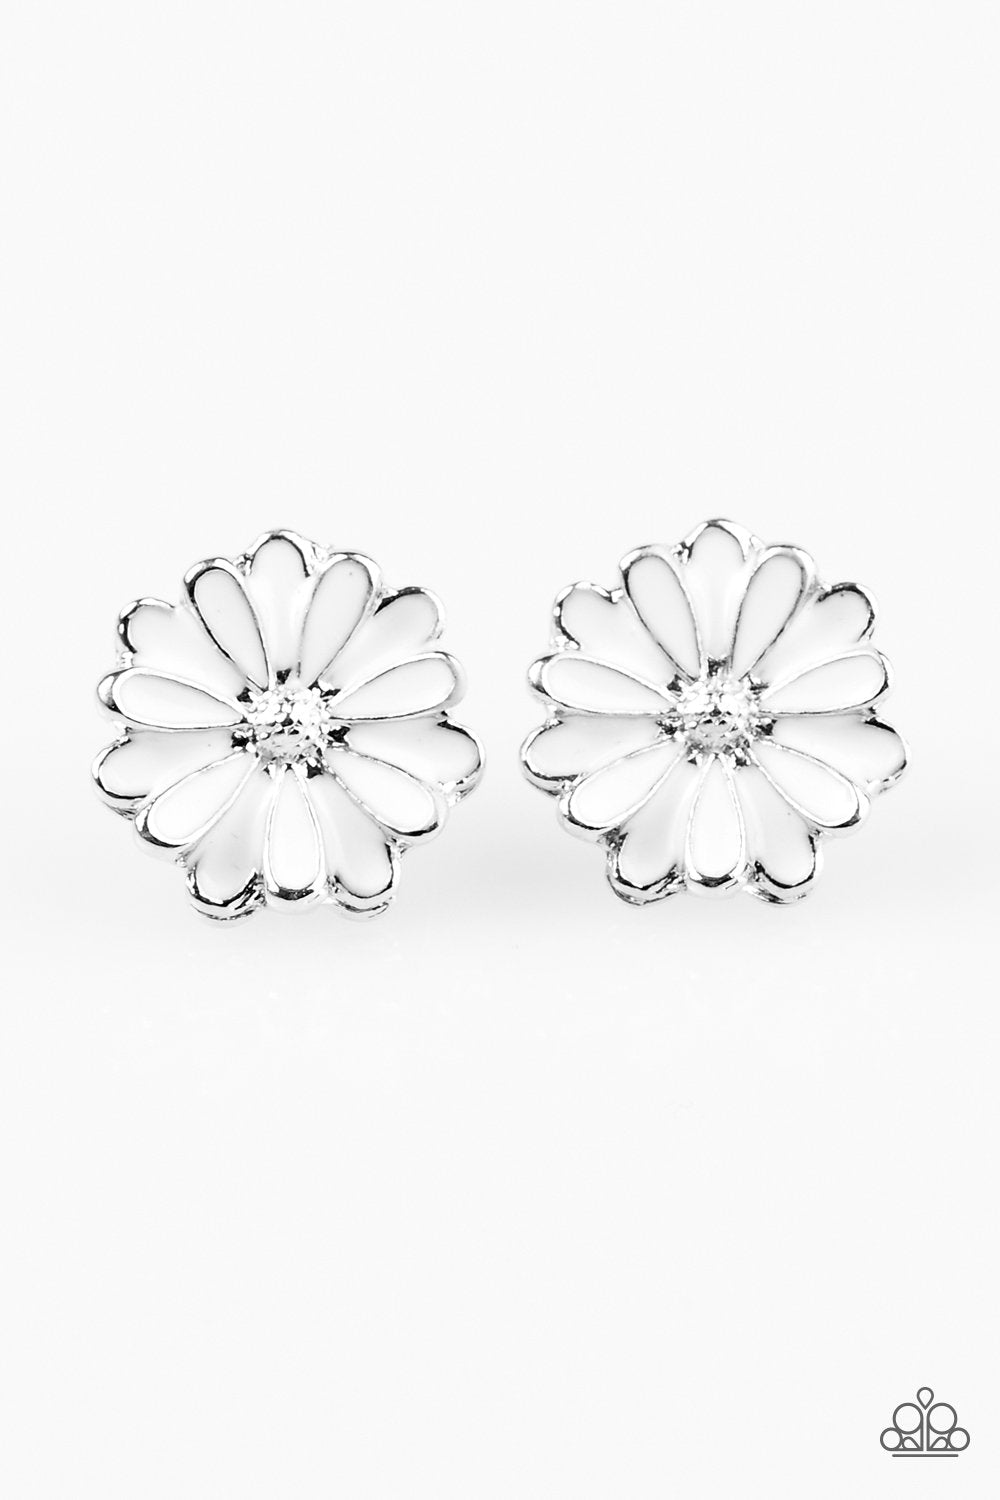 Magnificent Magnolia White Flower Post Earrings - Paparazzi Accessories-CarasShop.com - $5 Jewelry by Cara Jewels